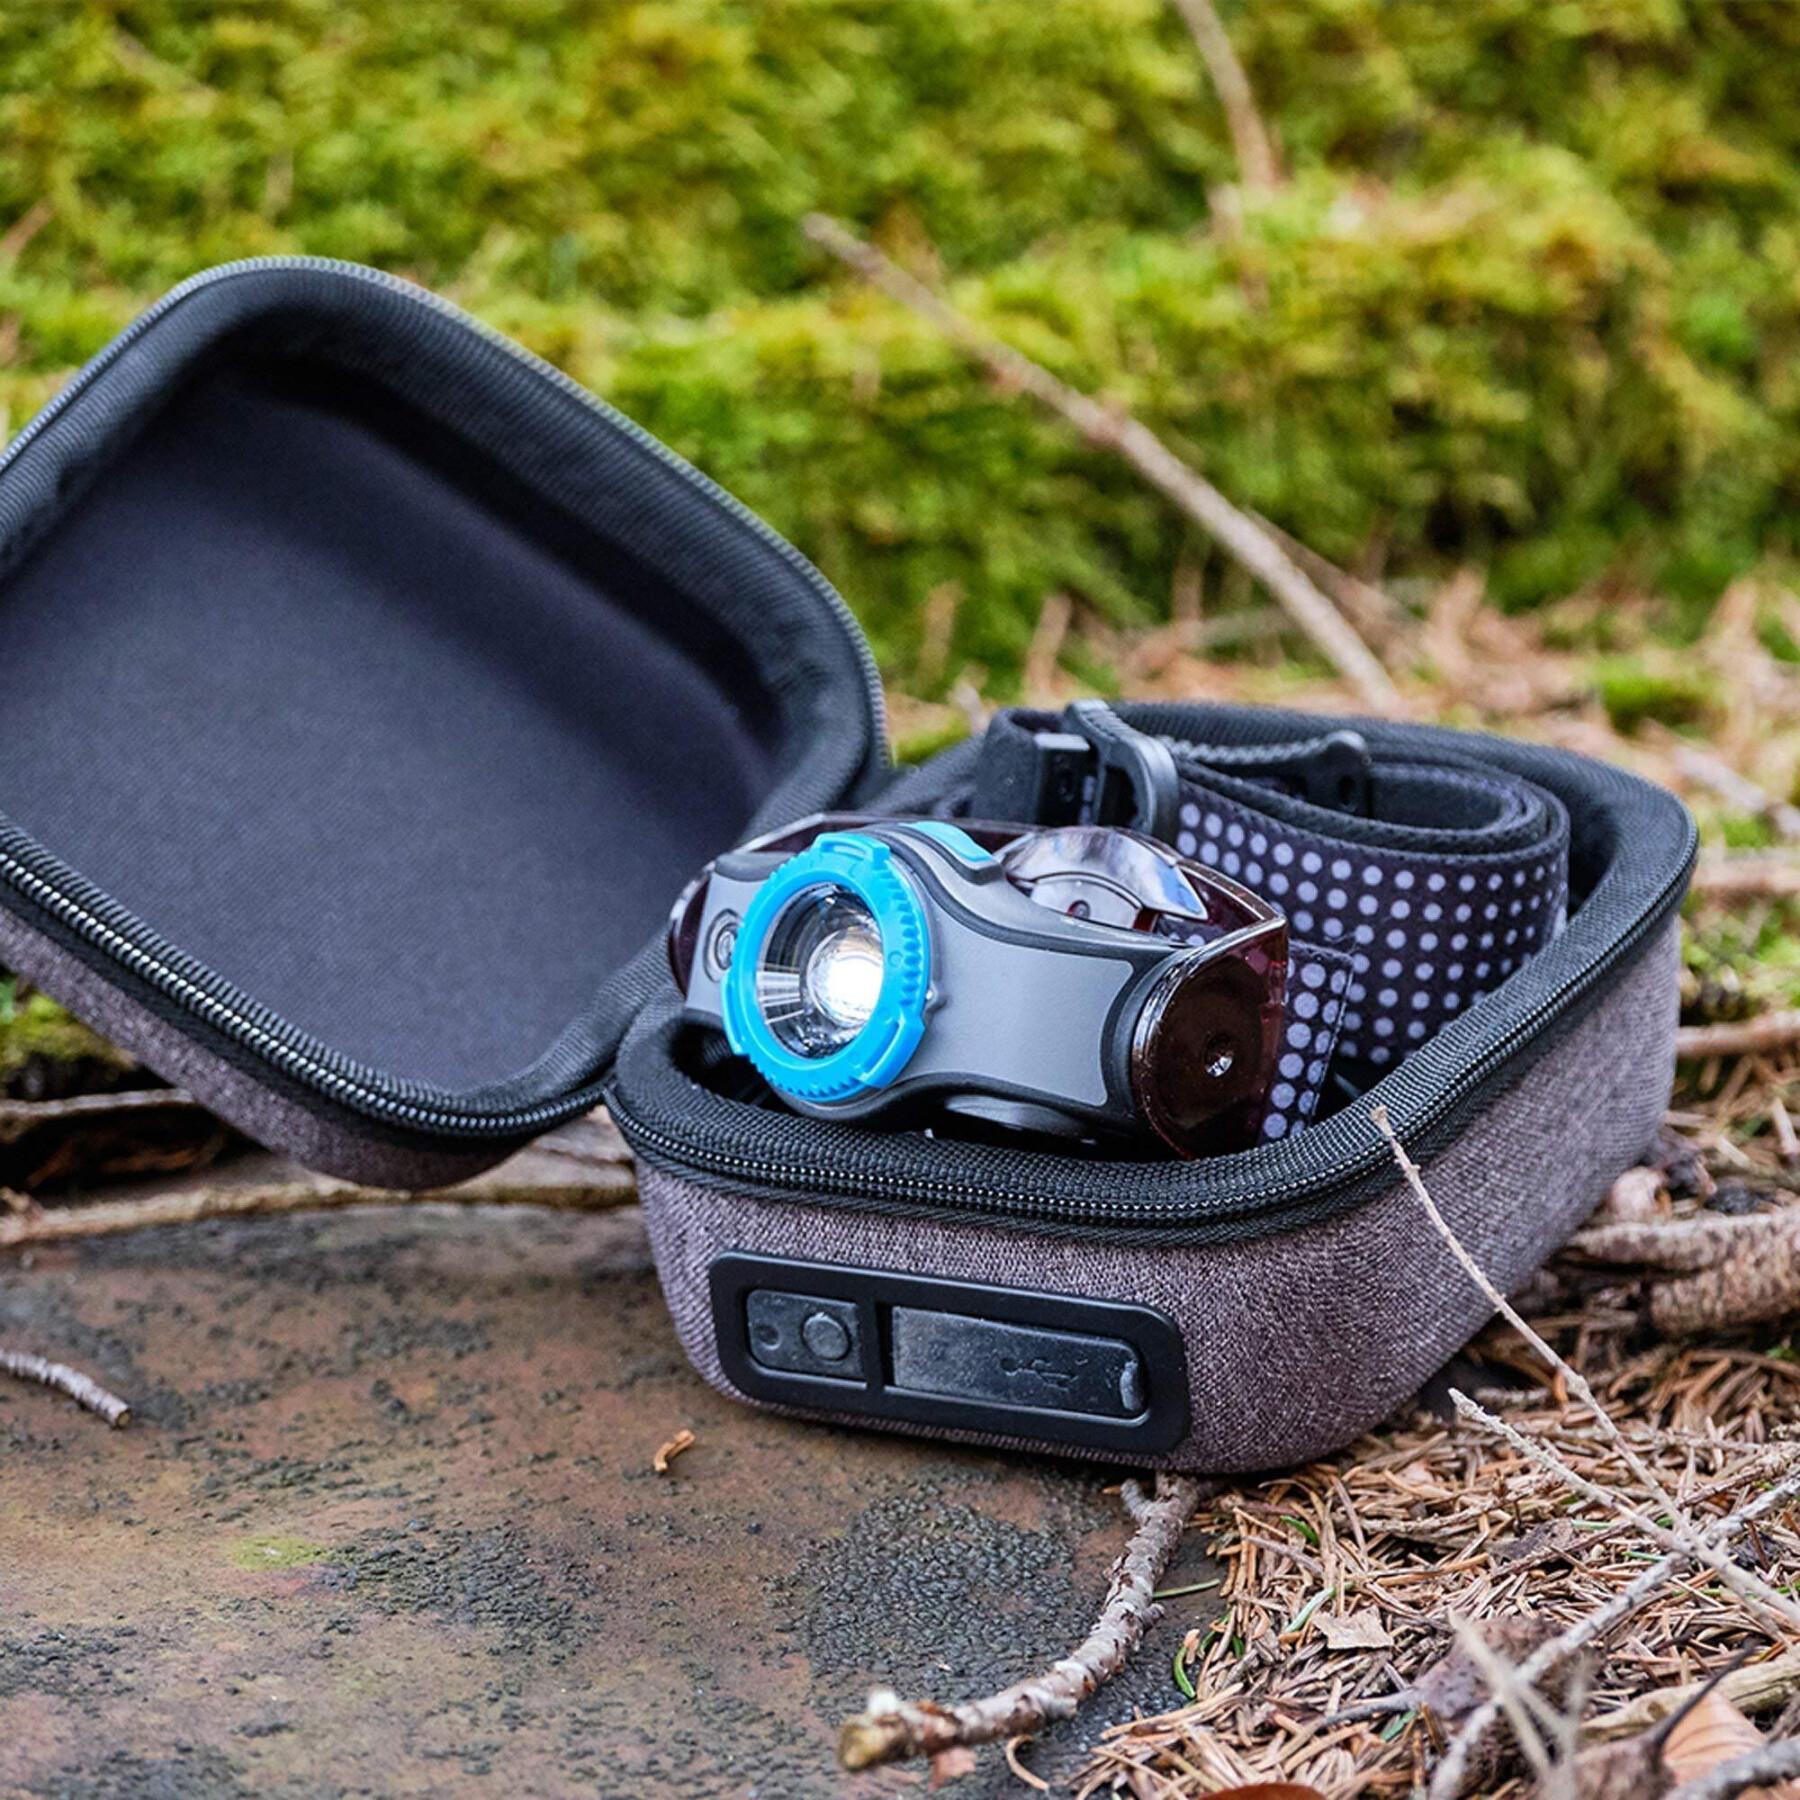 case with integrated battery ledlenser powercase